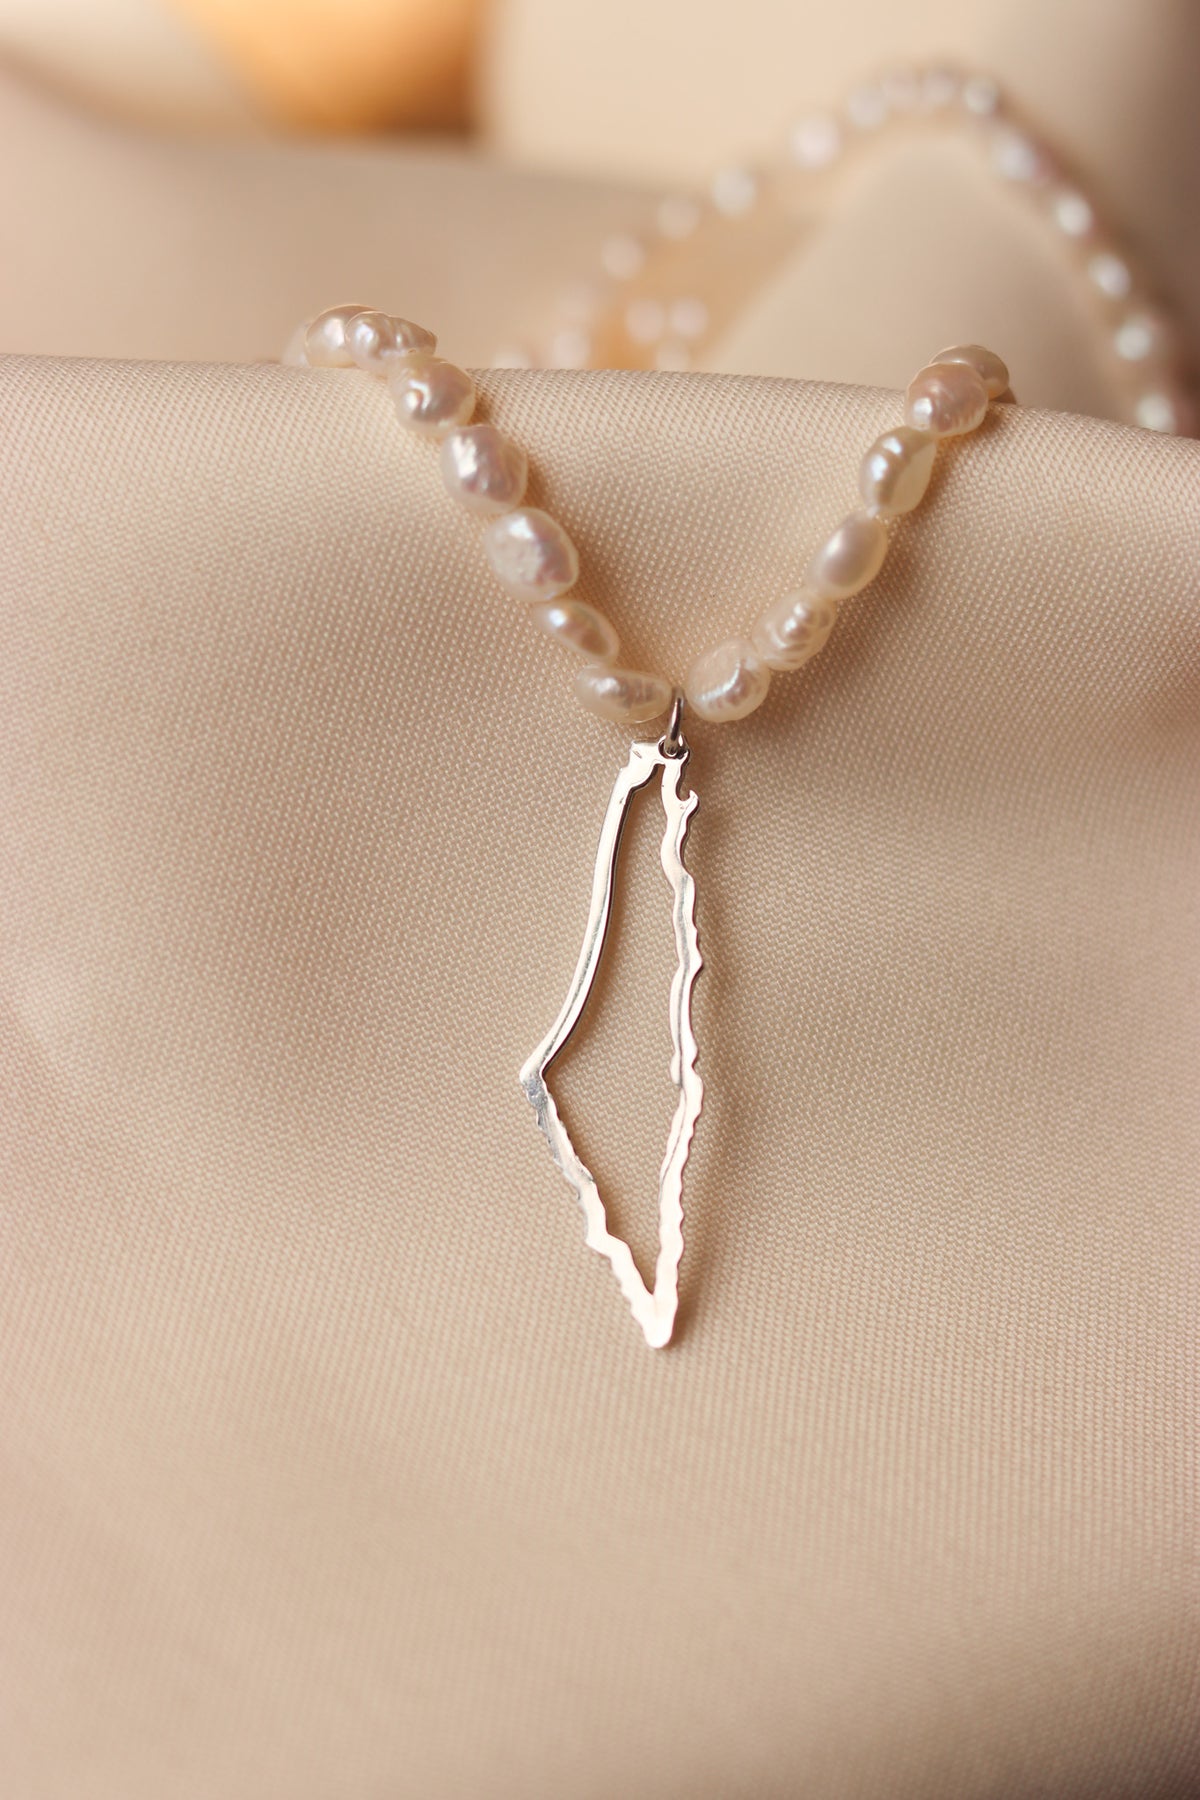 Palestine map frame choker necklace with pearls